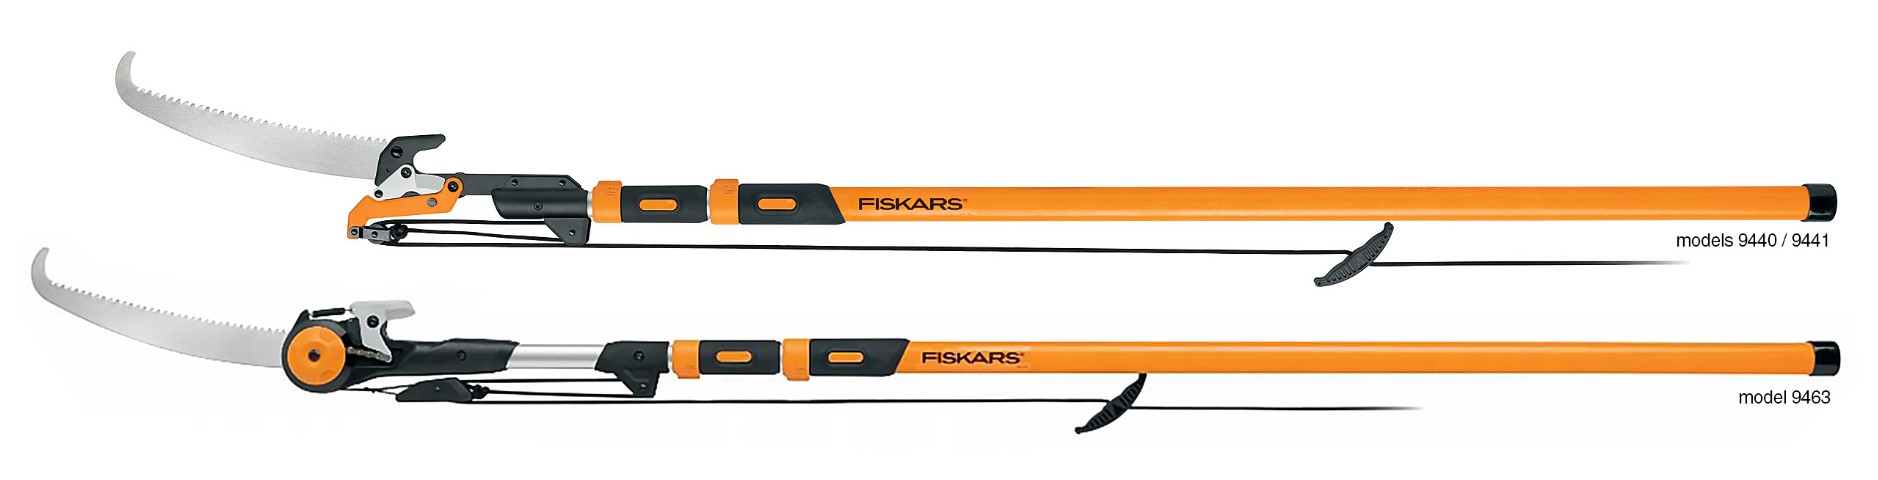 Fiskars 16 Foot Extendable Pole Saw/Pruners recalled due to laceration  hazard - Canada.ca